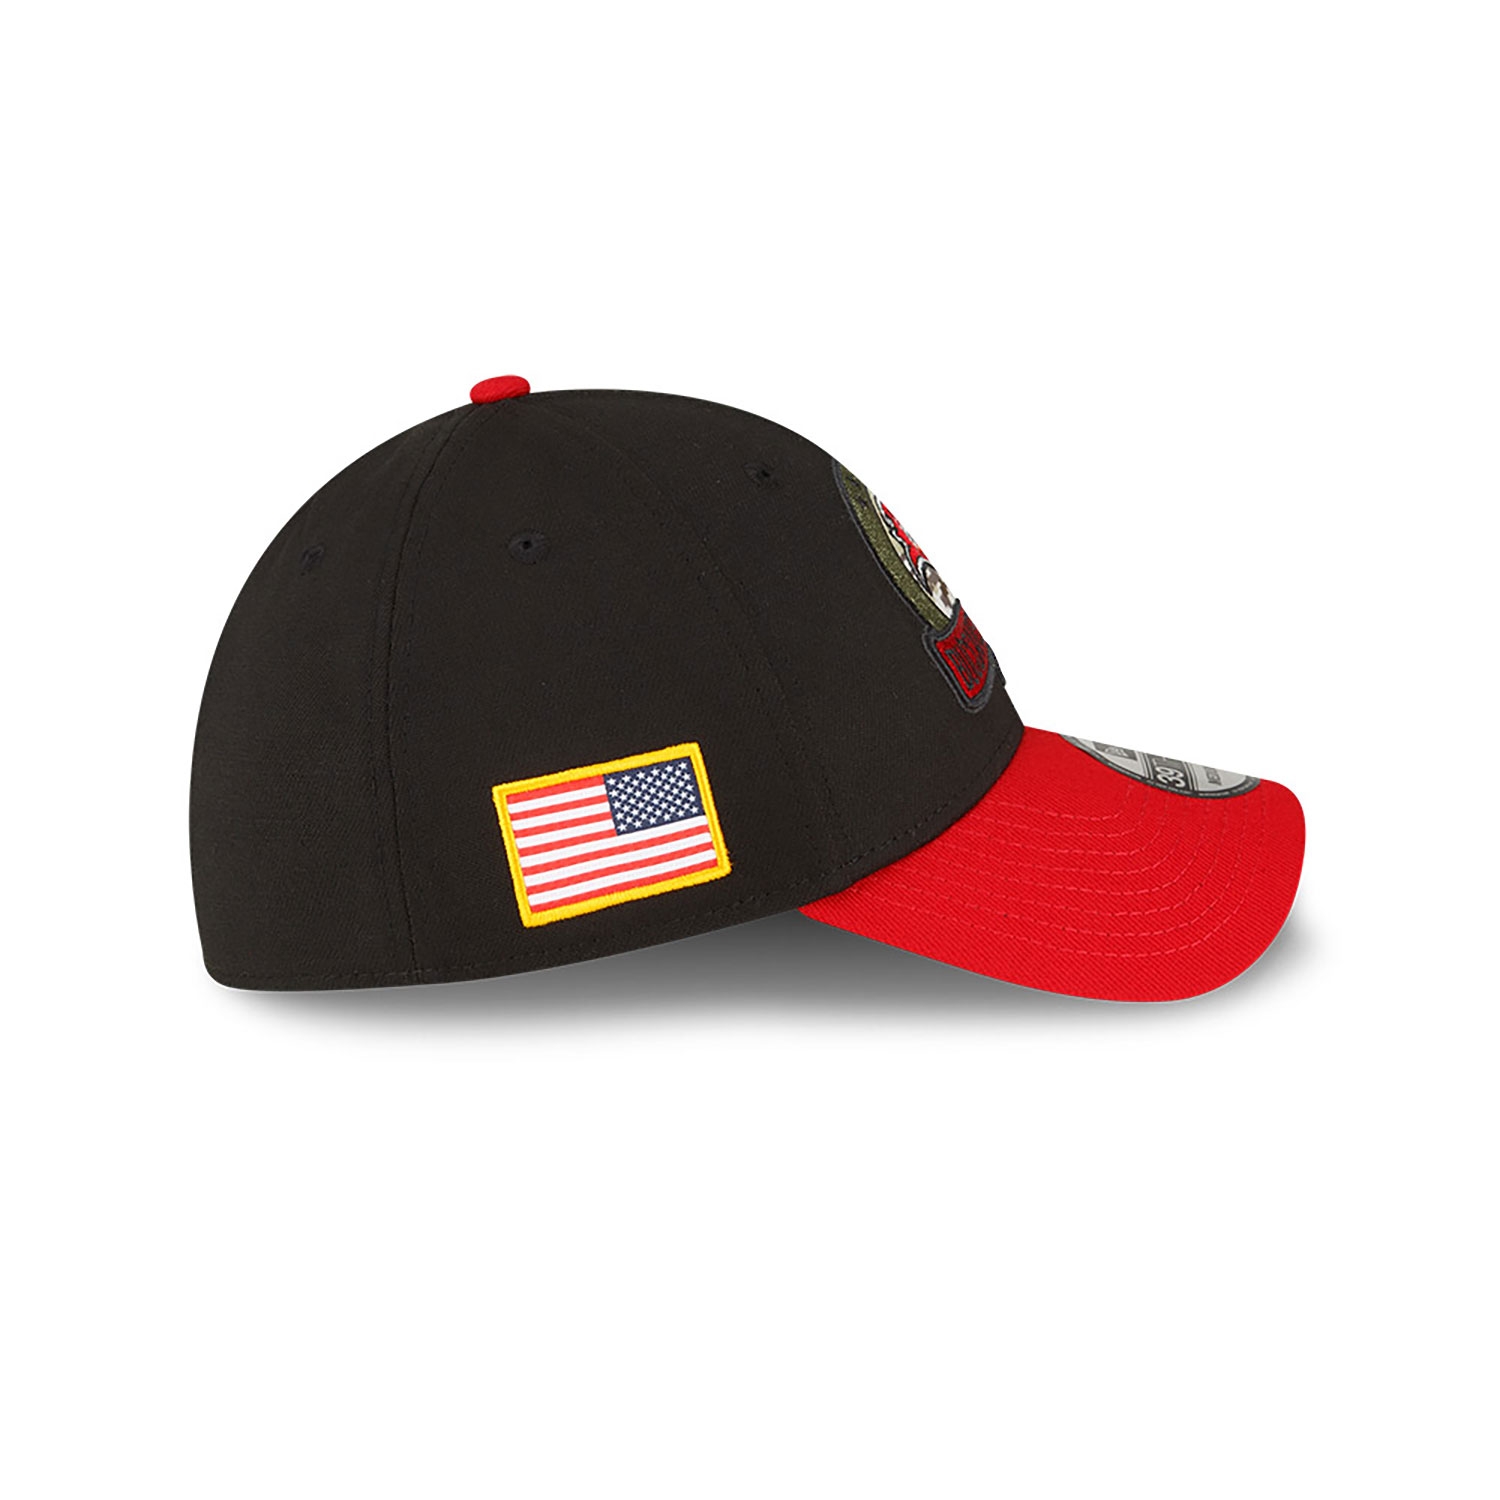 Tampa Bay Buccaneers NFL Salute to Service Black 39THIRTY Stretch Fit Cap